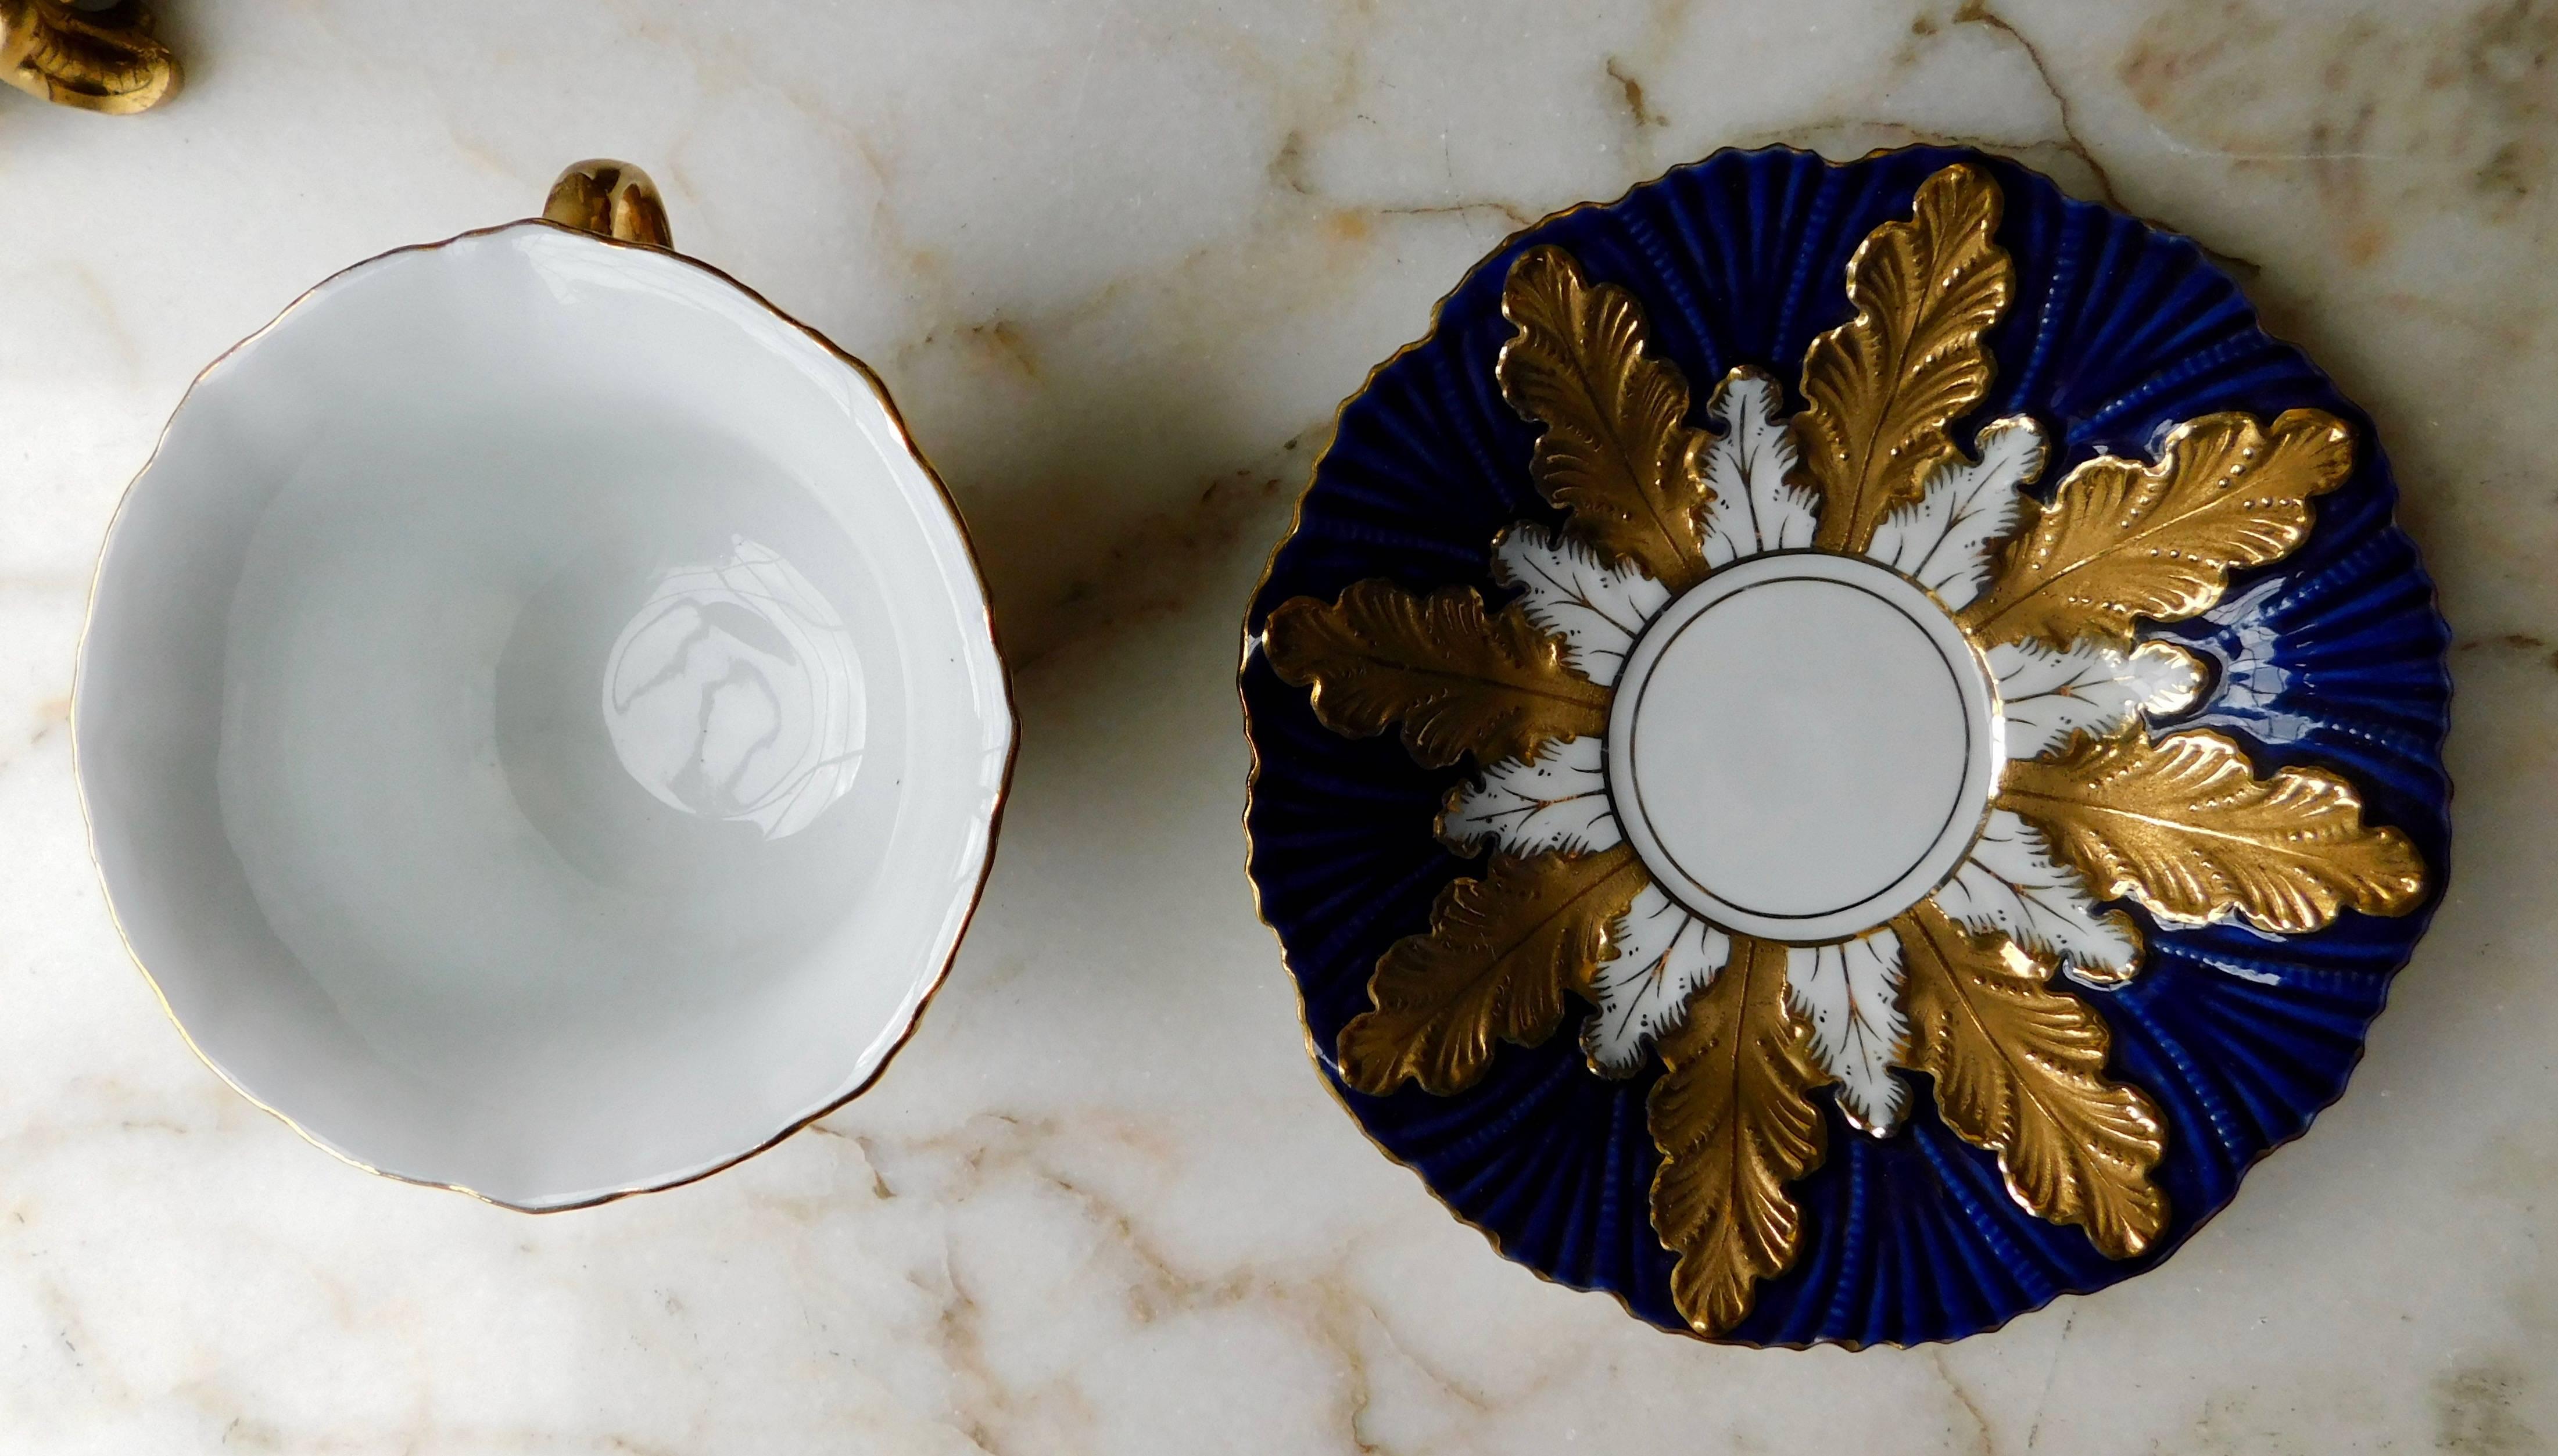 19th century Meissen Porcelain cup and saucer with gold, blue and white decoration.

Meissen Porcelain or Meissen china is the first European hard-paste porcelain. It was developed starting in 1708 by Ehrenfried Walther von Tschirnhaus. After his